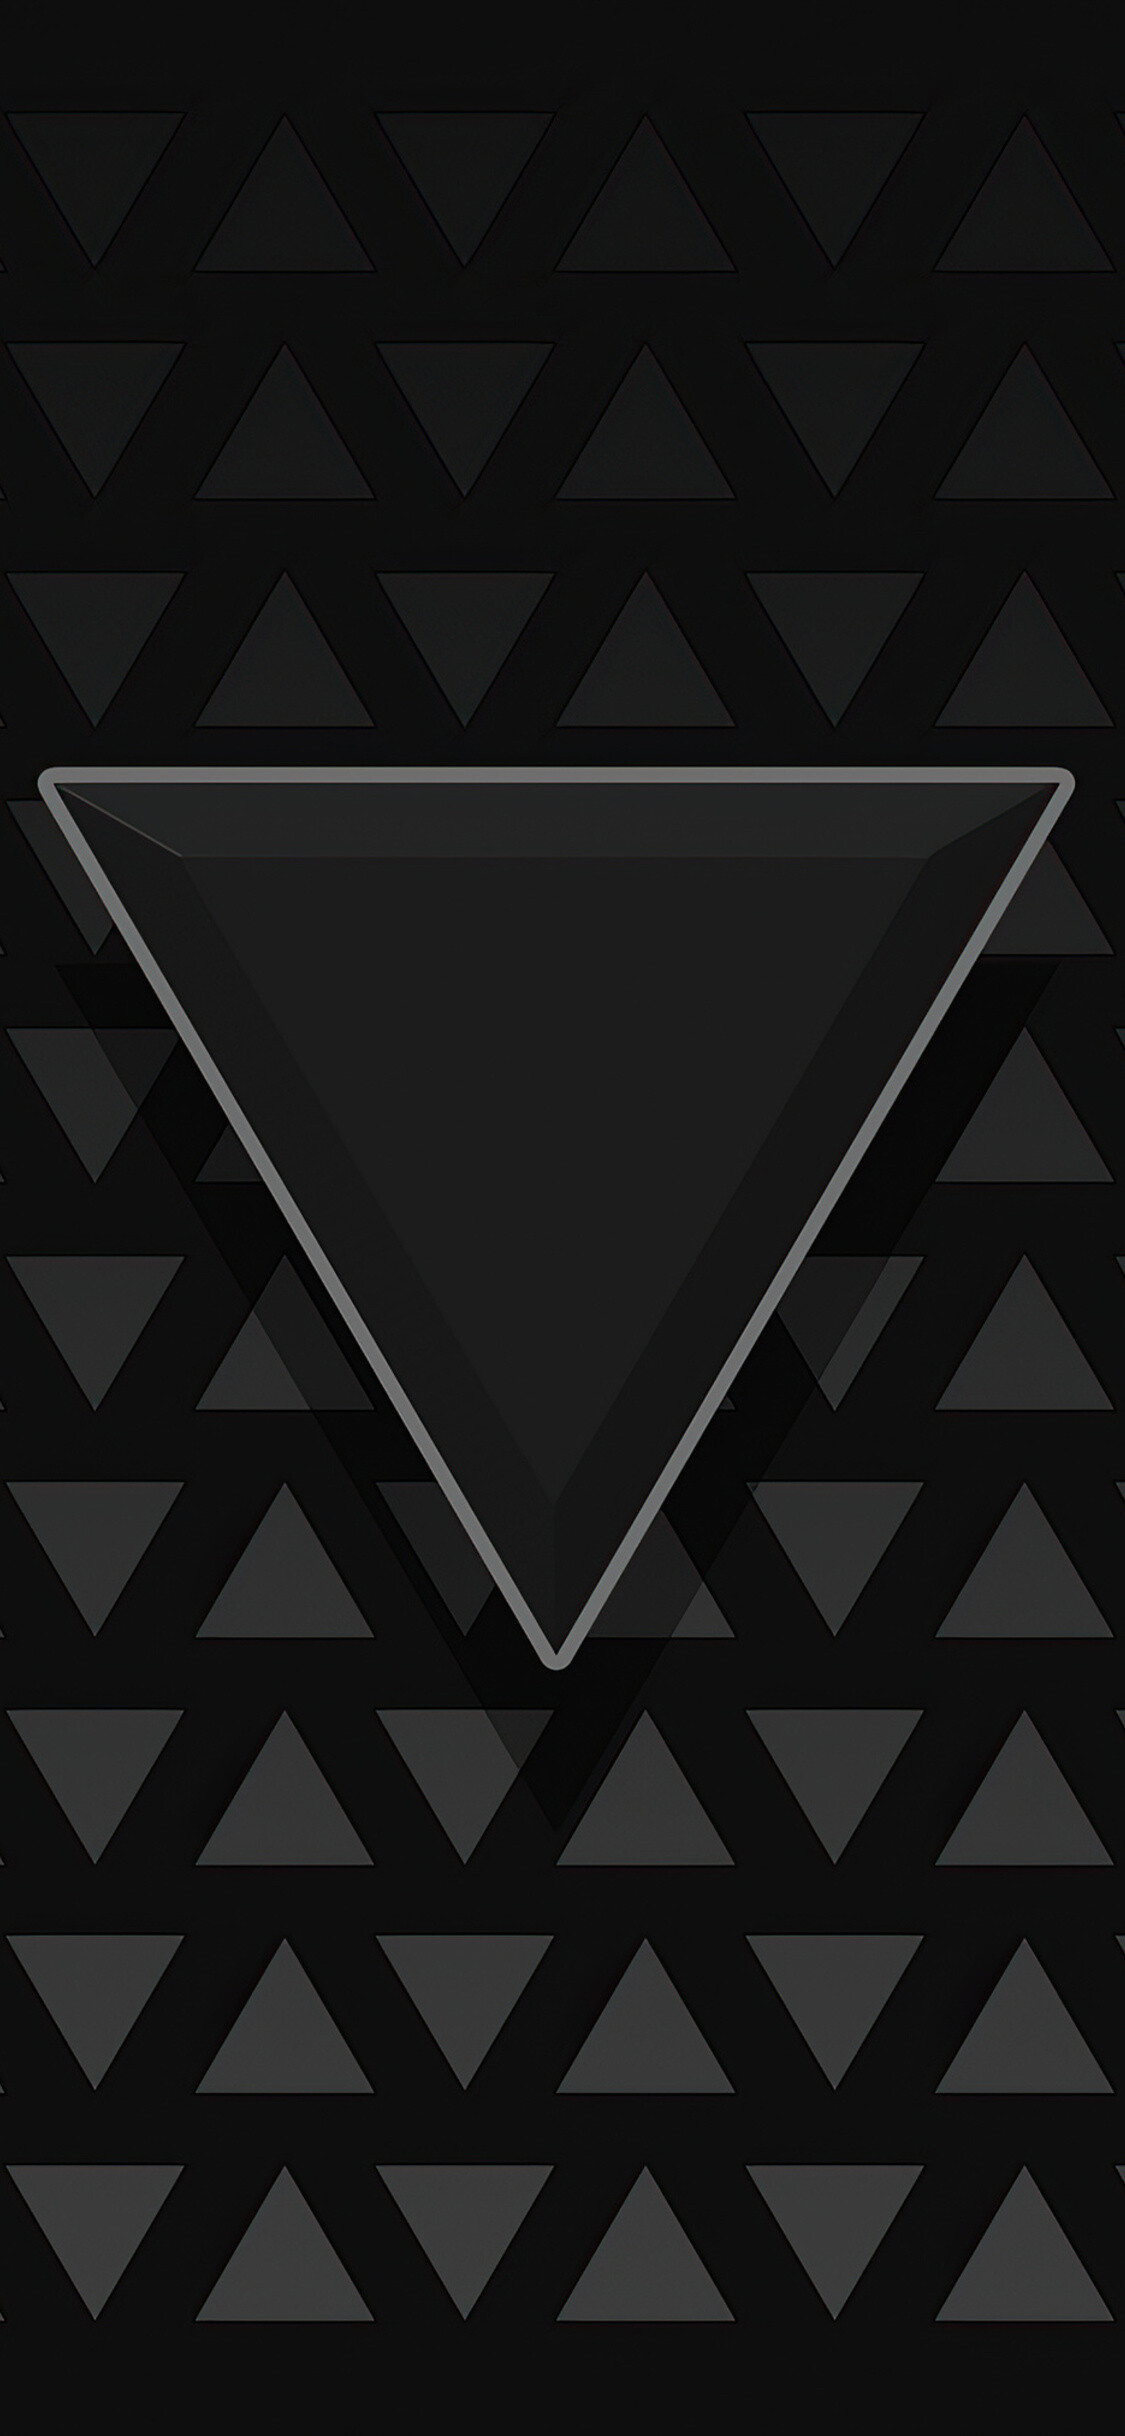 Triangle: Dark black equilateral figure, Gradient, Identical shapes. 1130x2440 HD Background.